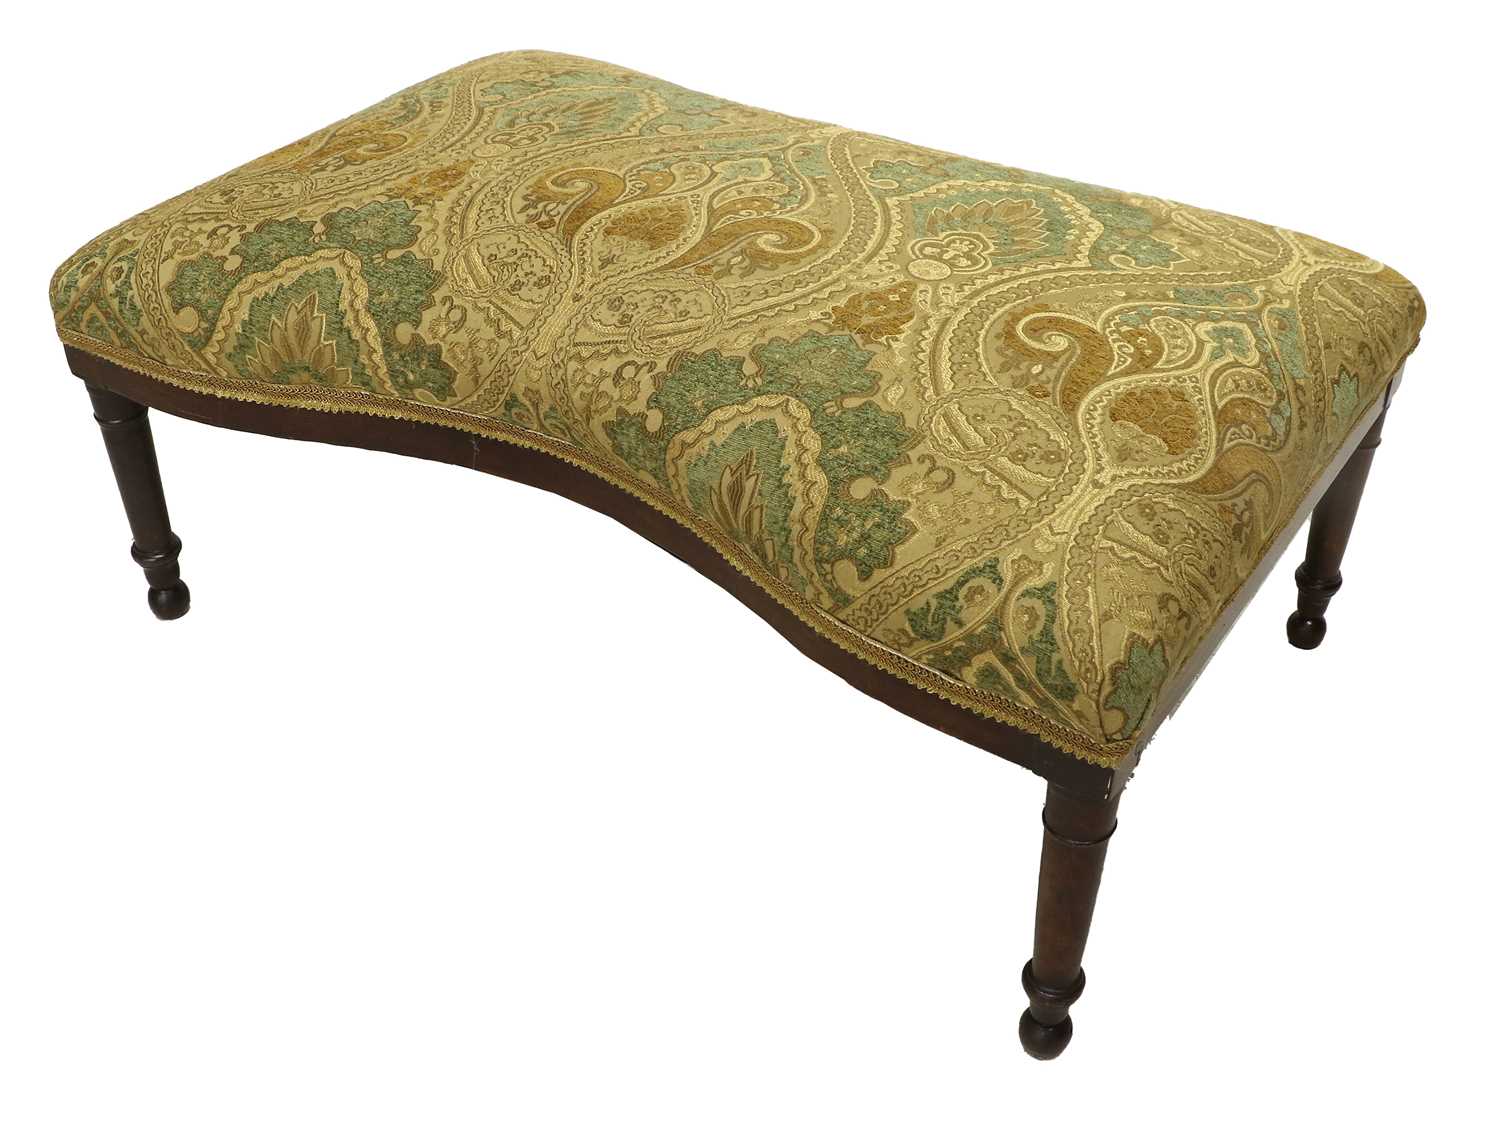 A Late George III Mahogany-Framed Serpentine-Shape Footstool, early 19th century, recovered in - Image 2 of 2